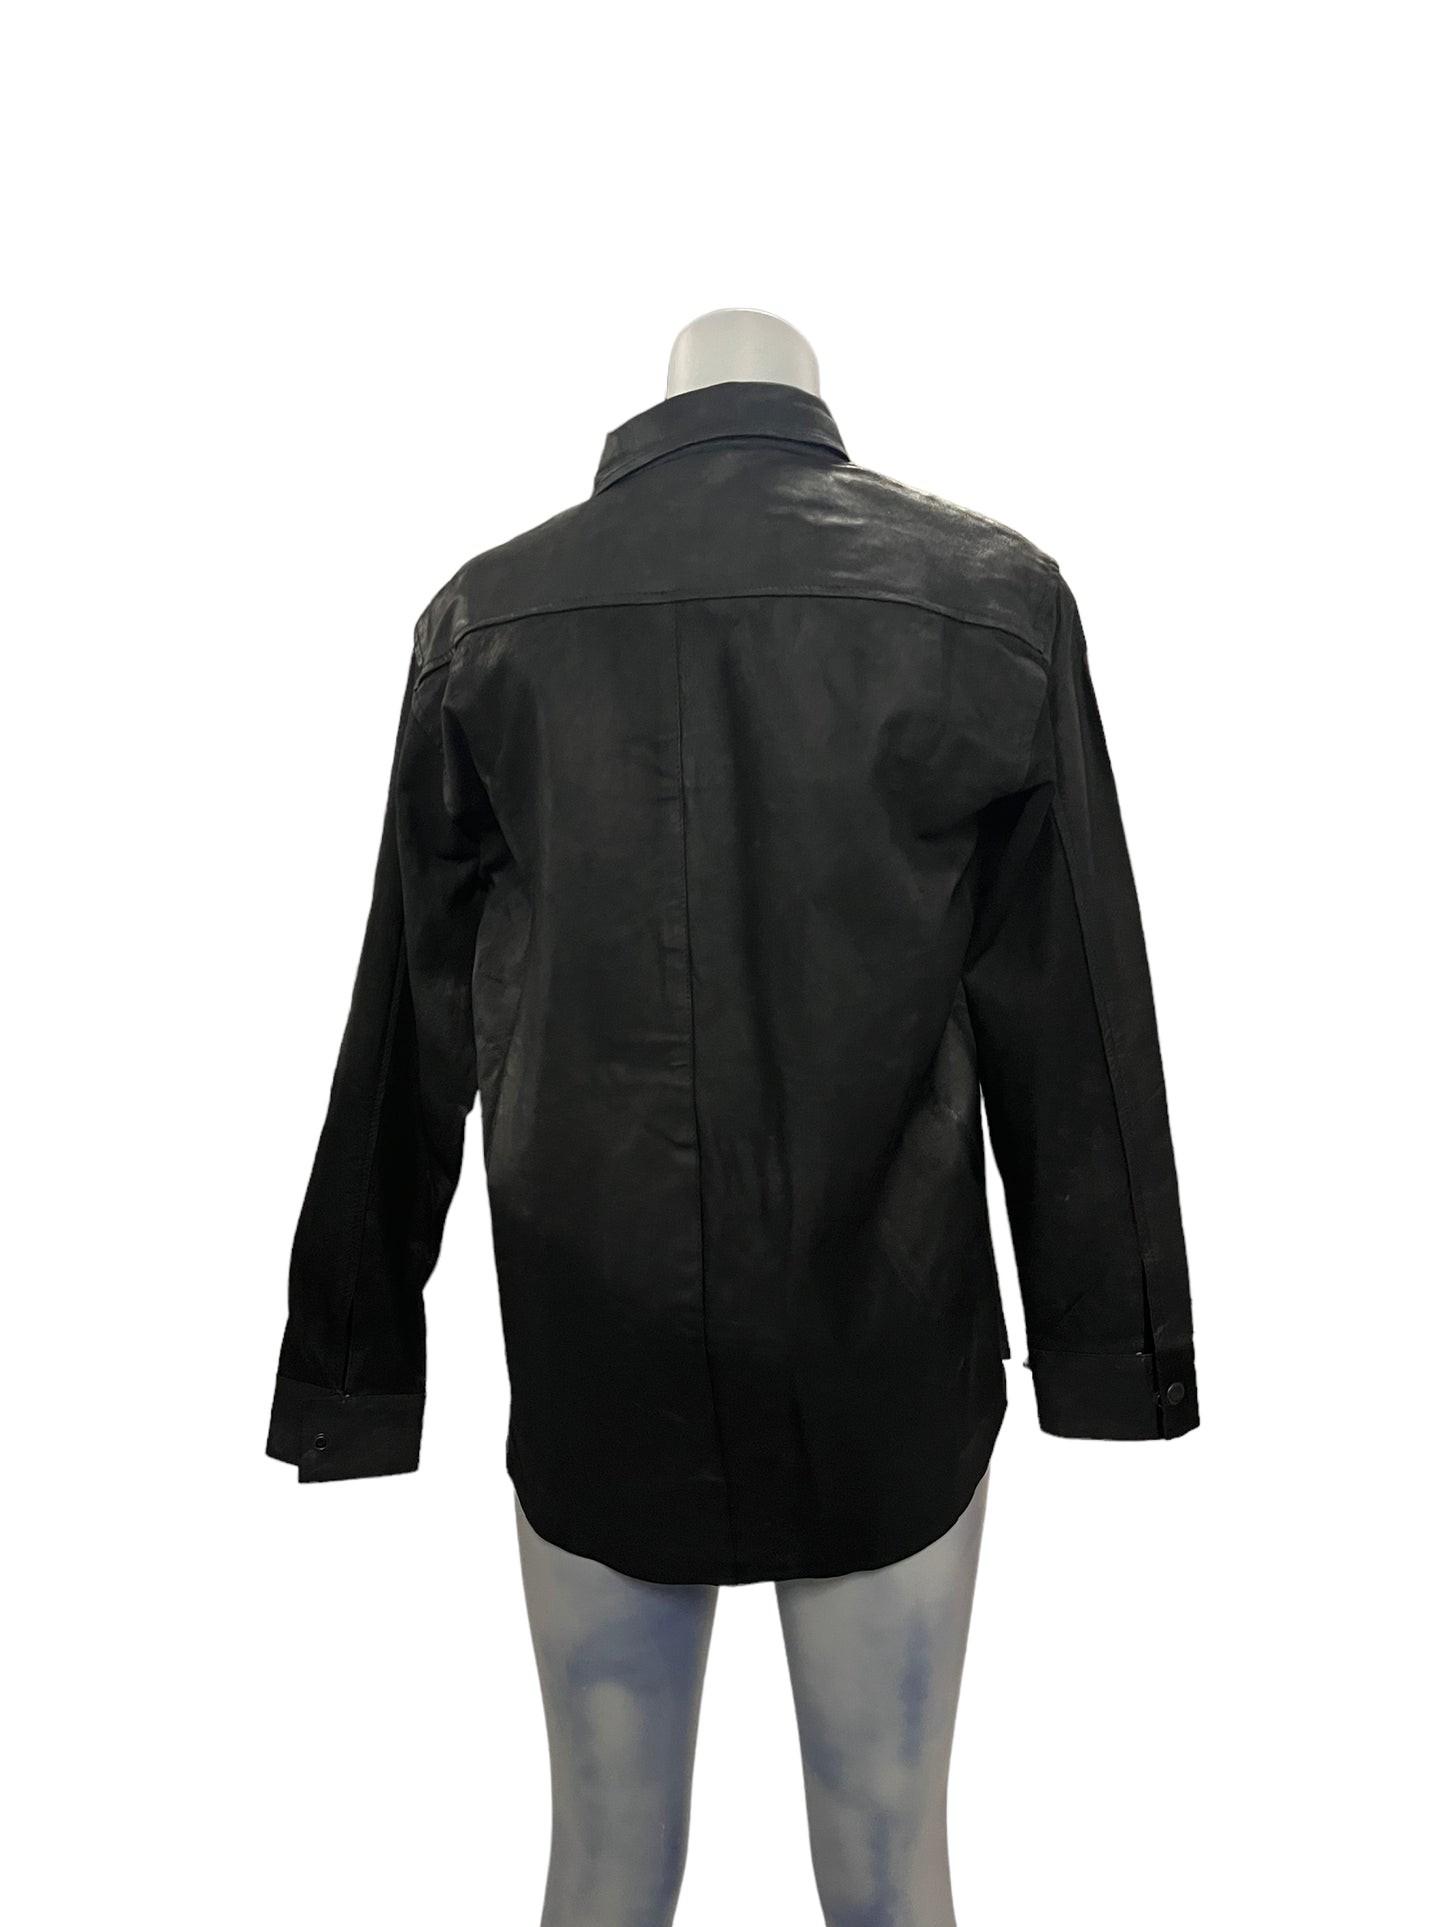 Fashion World - Black Leather Jacket With Buttons